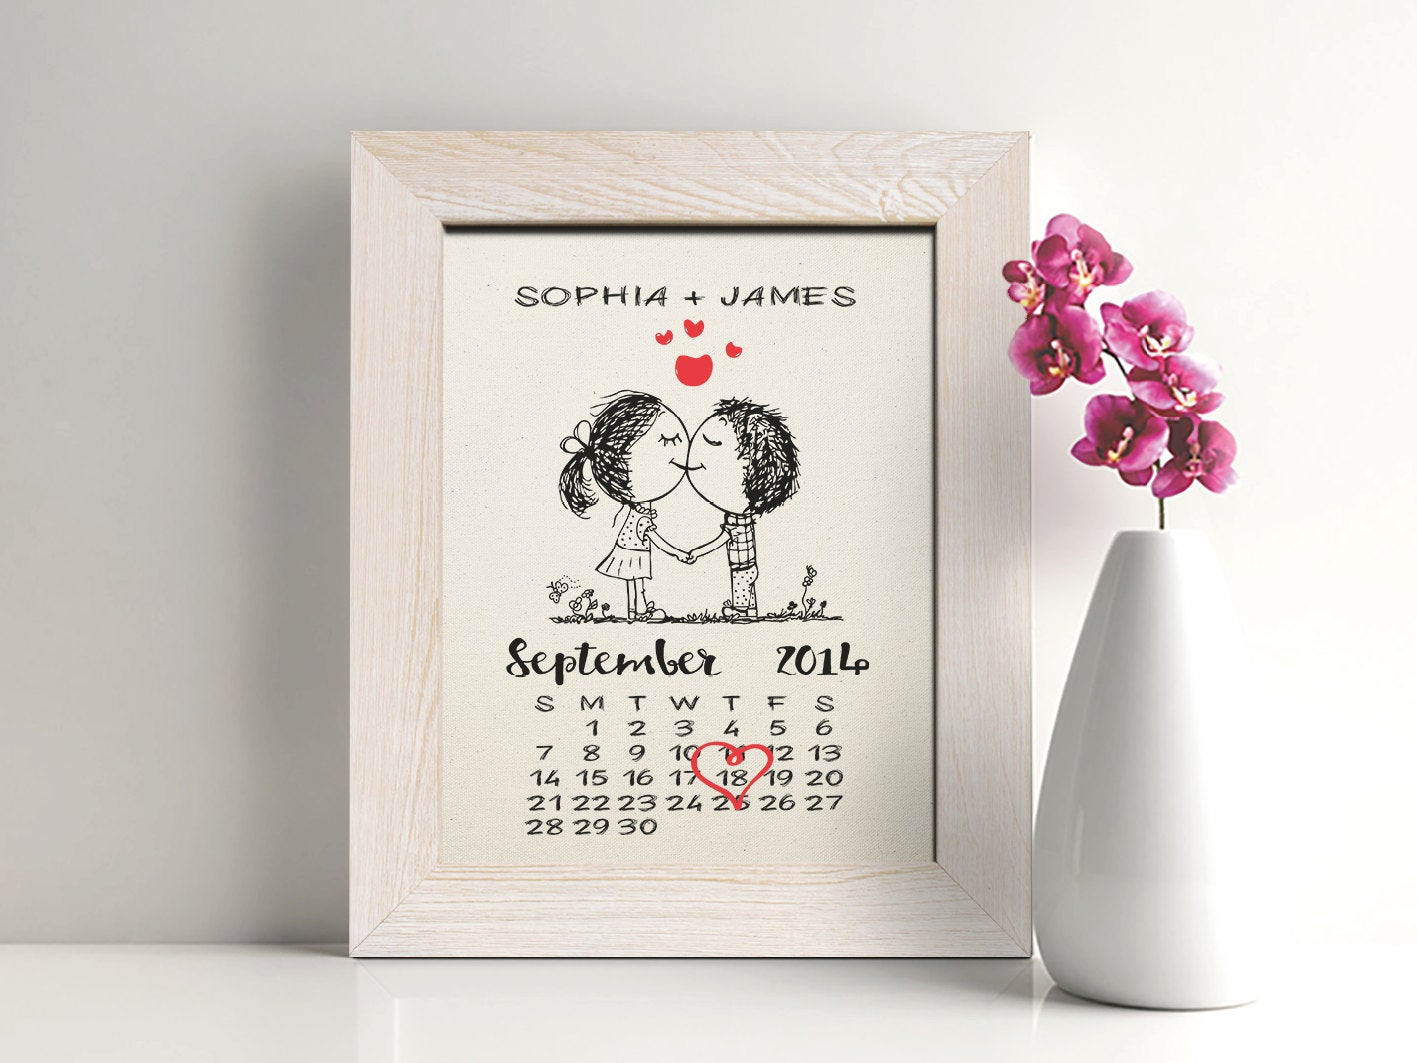 2Nd Anniversary Gift Ideas Her
 20 the Best Ideas for Second Anniversary Gift Ideas for